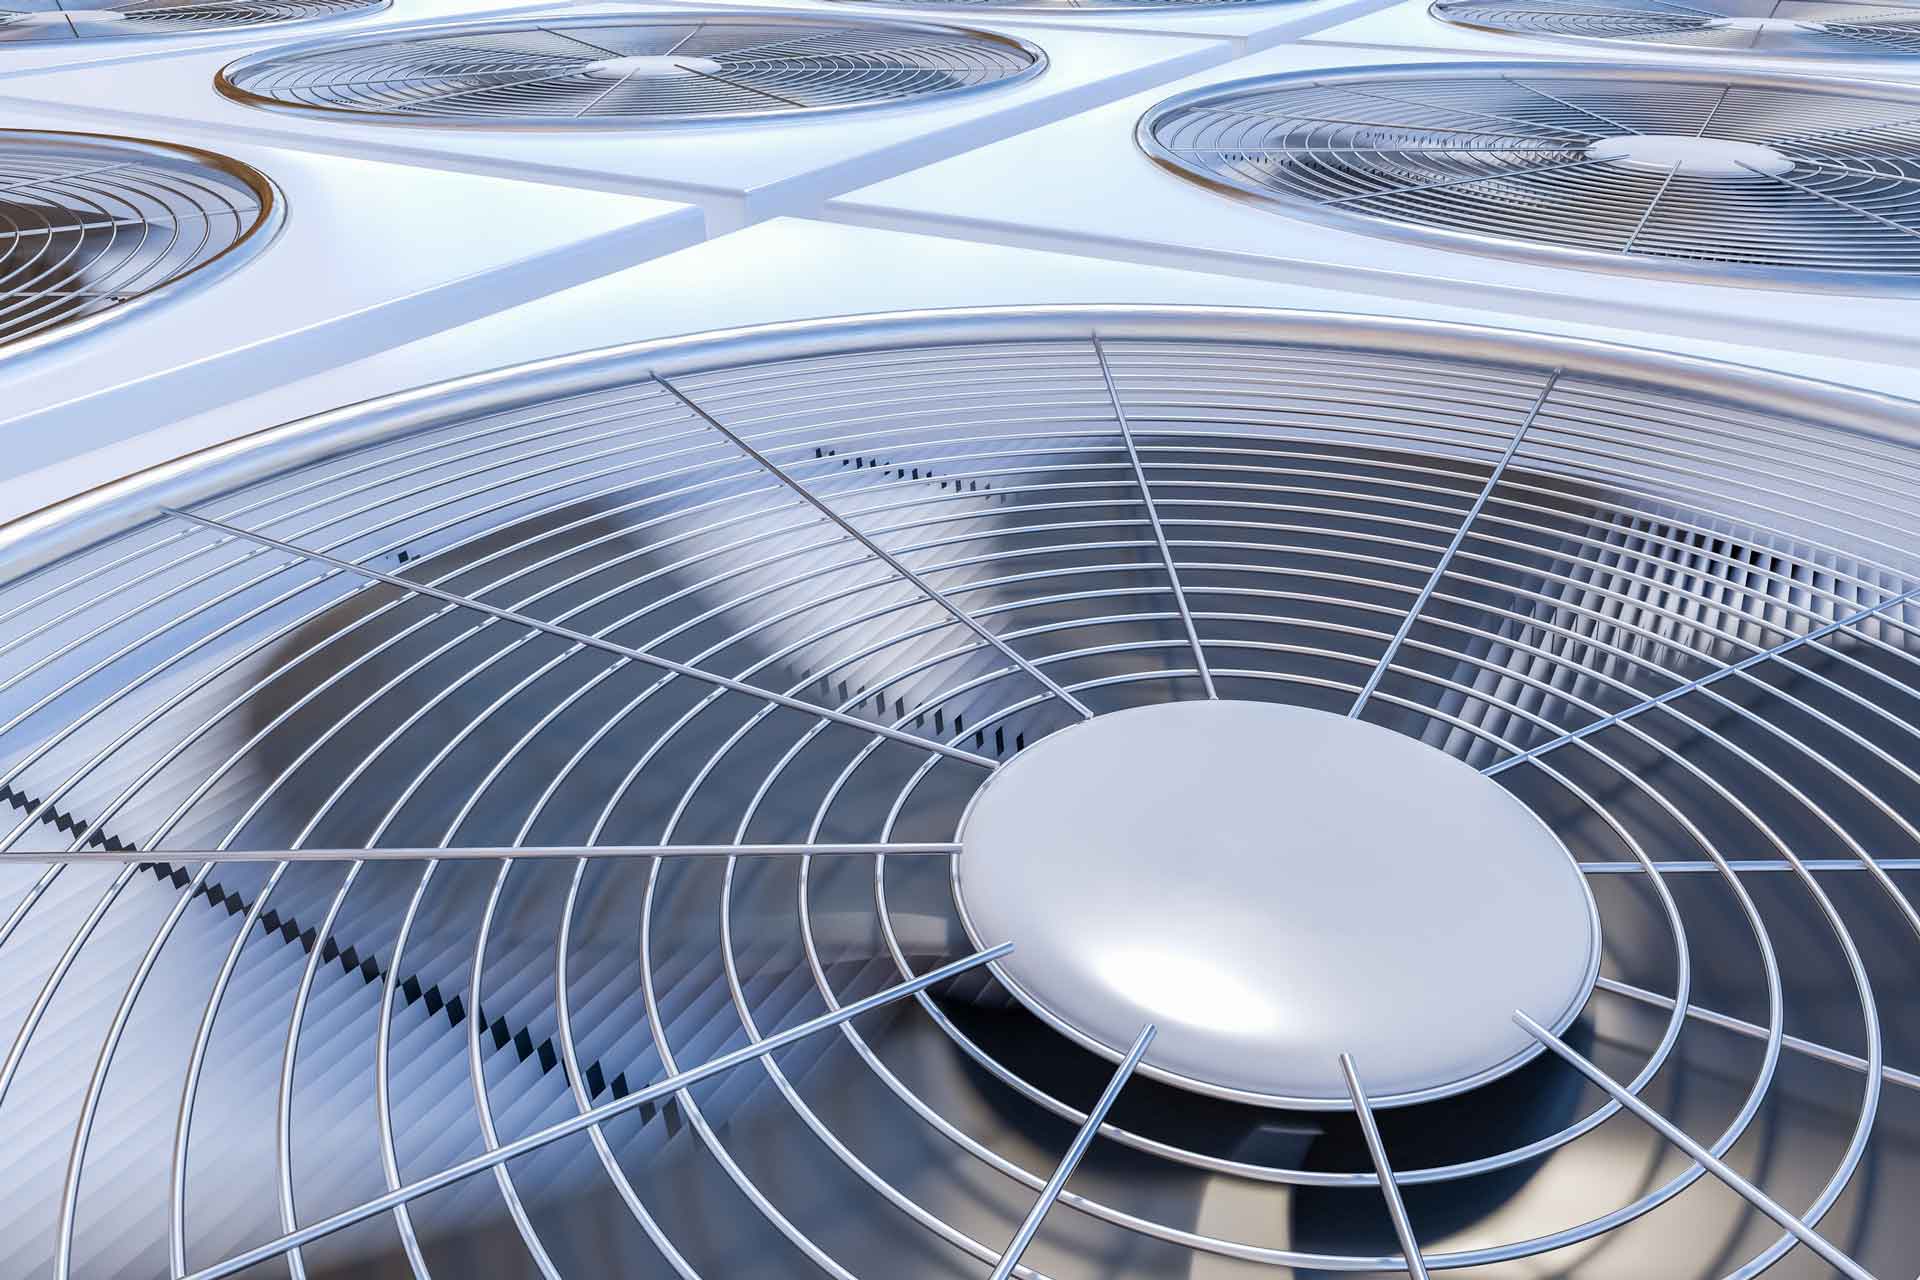 6 Telltale Signs it’s Time for an Air Conditioning Replacement